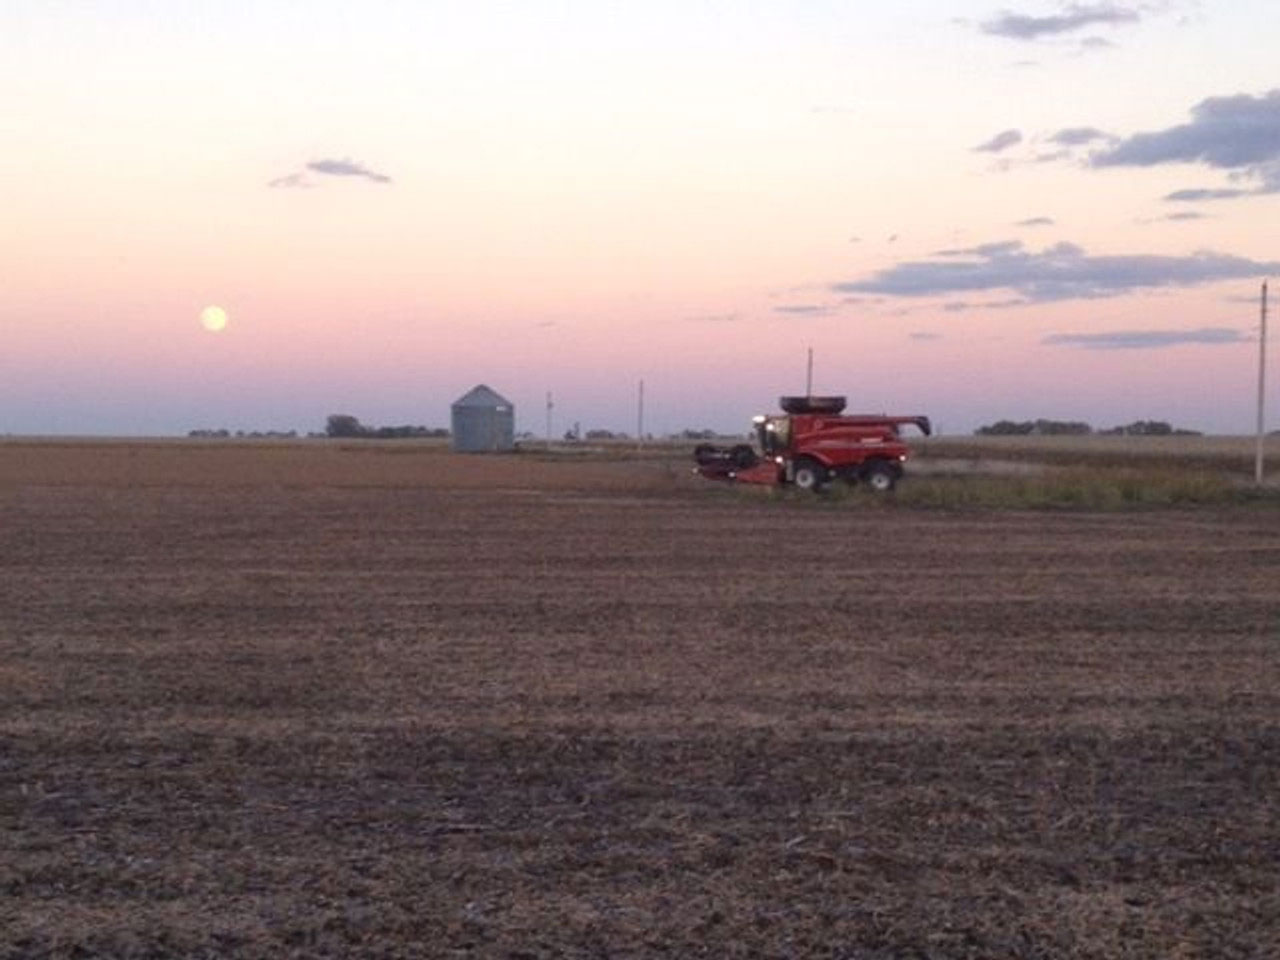 A red combine going through the Laura Soybean fields with sun starting to set.